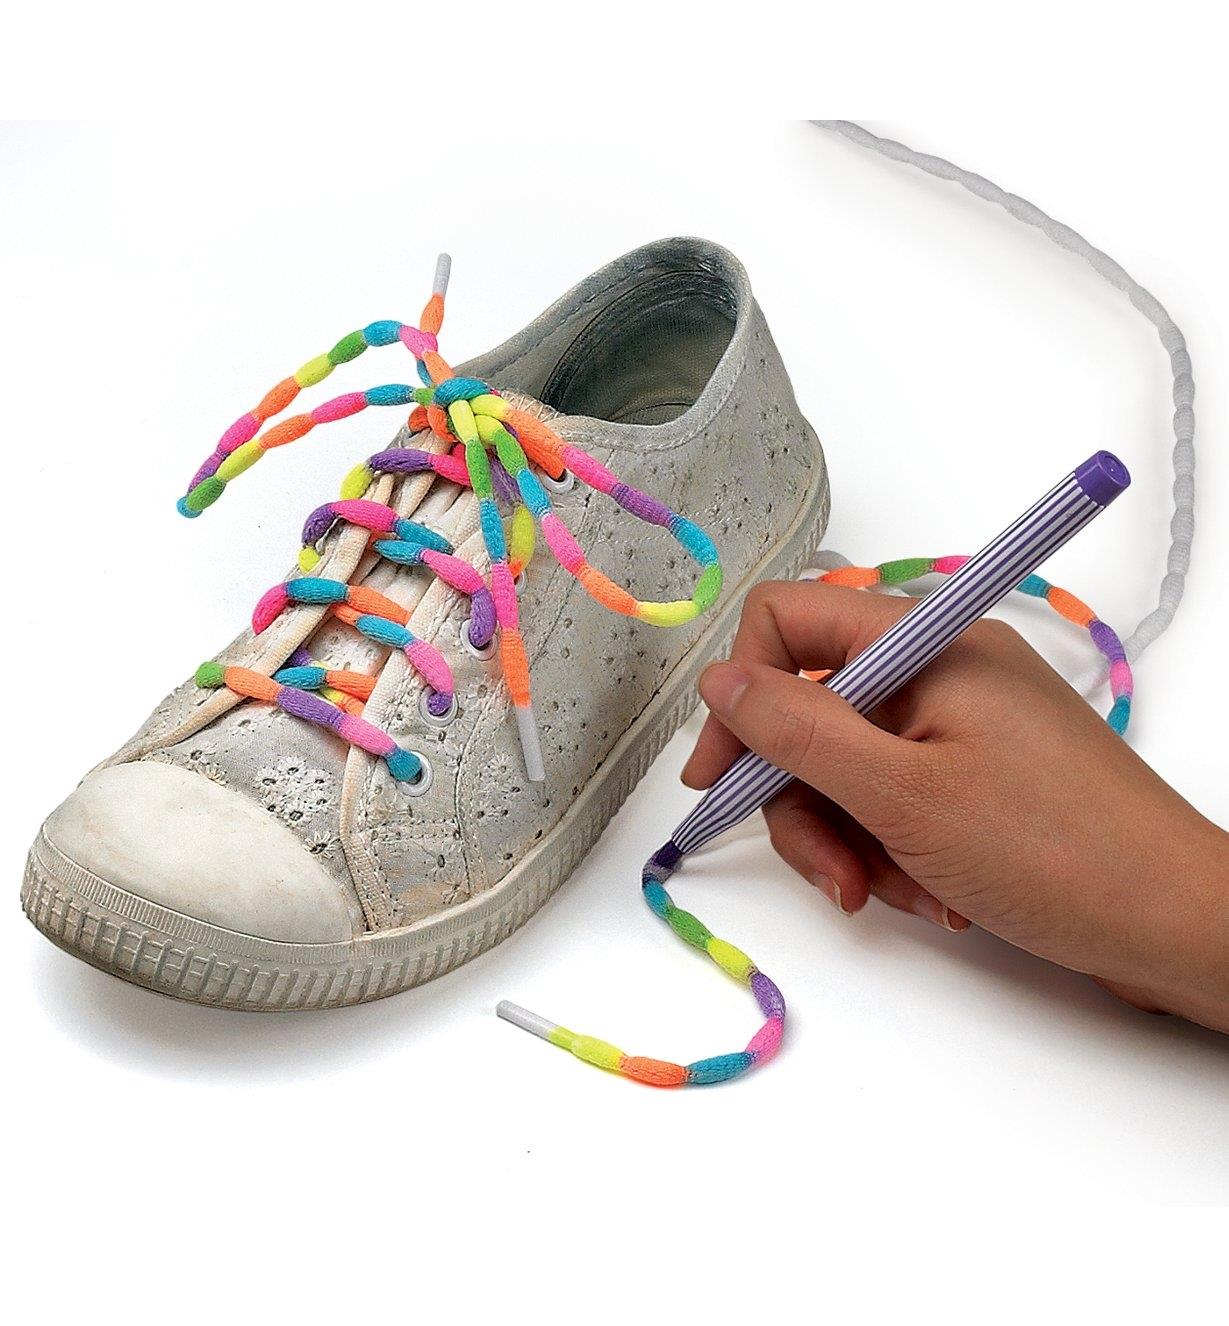 Coloring a lace with different colors of makers, beside a shoe with a lace already colored